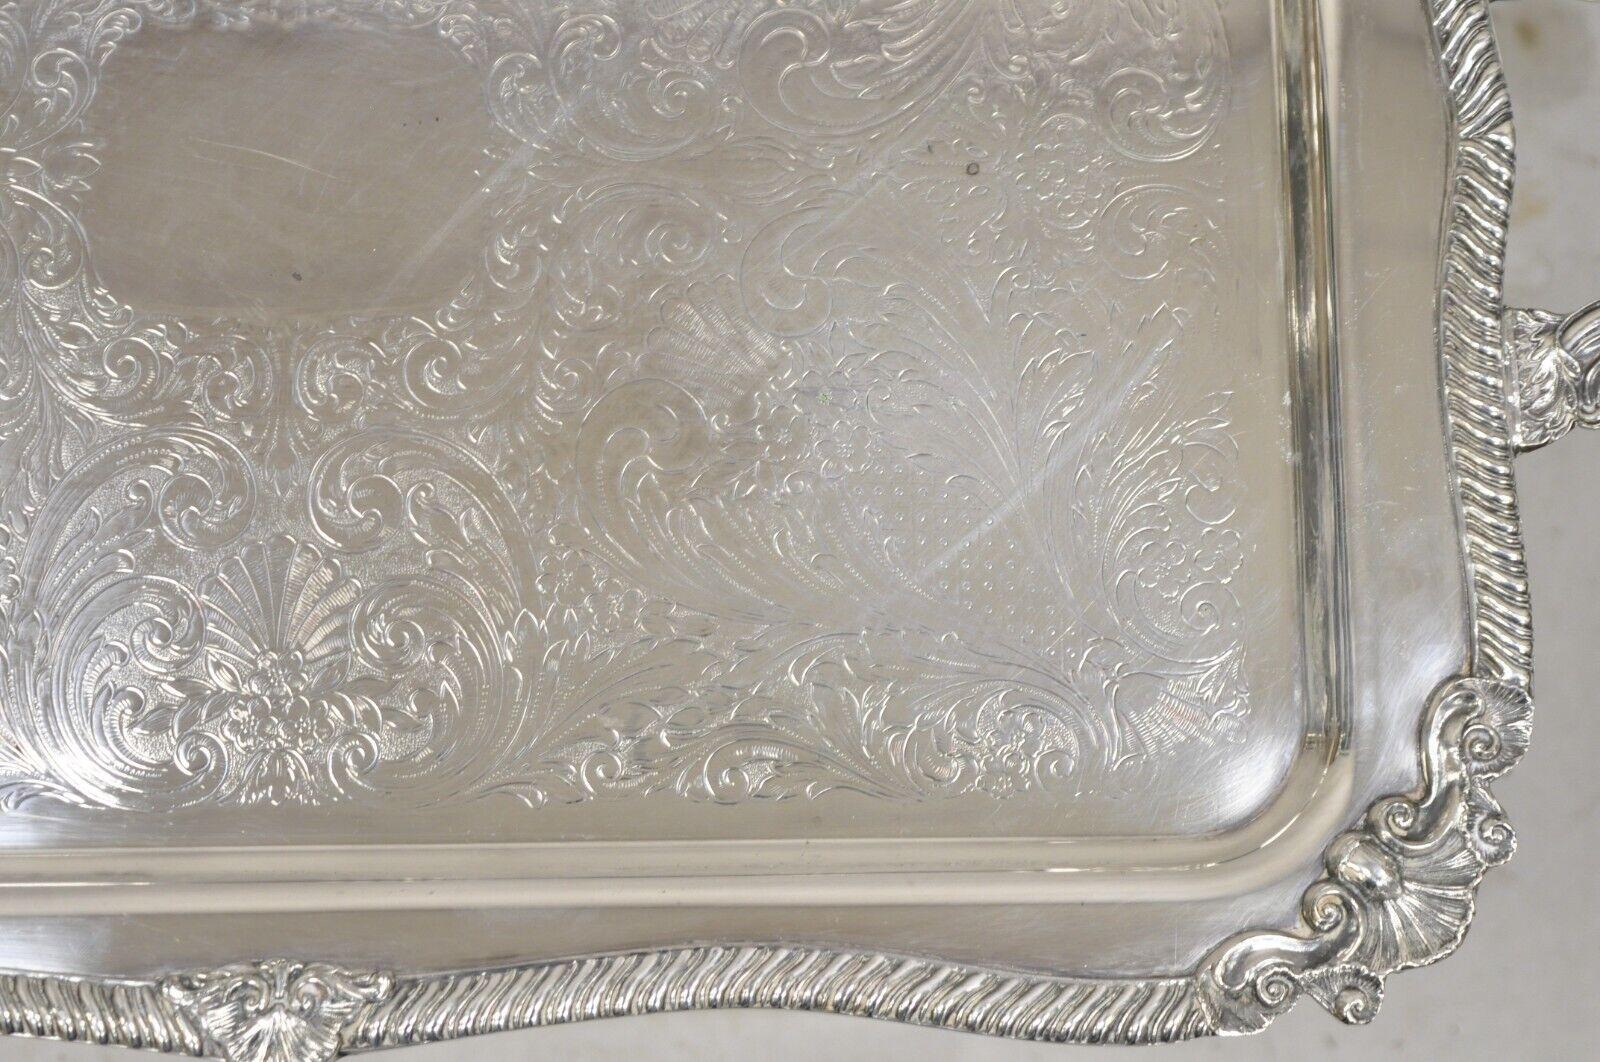 EPCA Poole Silver Co 400 Lancaster Rose Large Silver Plated Serving Platter Tray For Sale 4